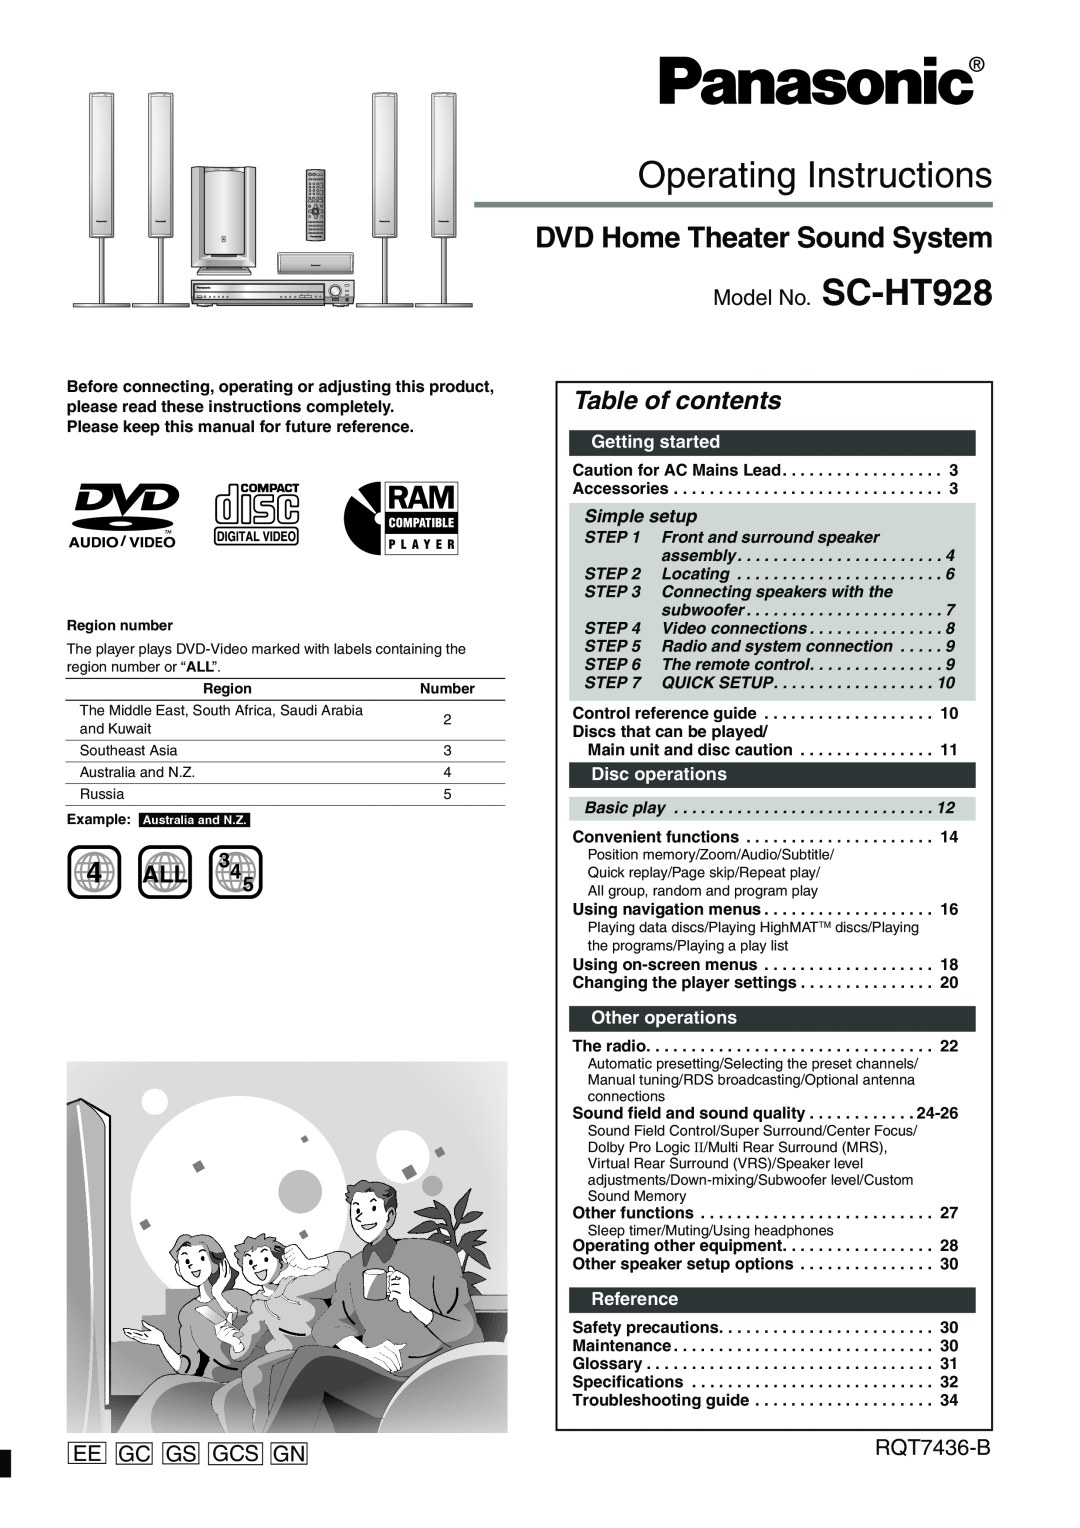 Panasonic specifications Operating Instructions, DVD Home Theater Sound System, Model No. SC-HT928, Ee Gcgsgcs Gn 